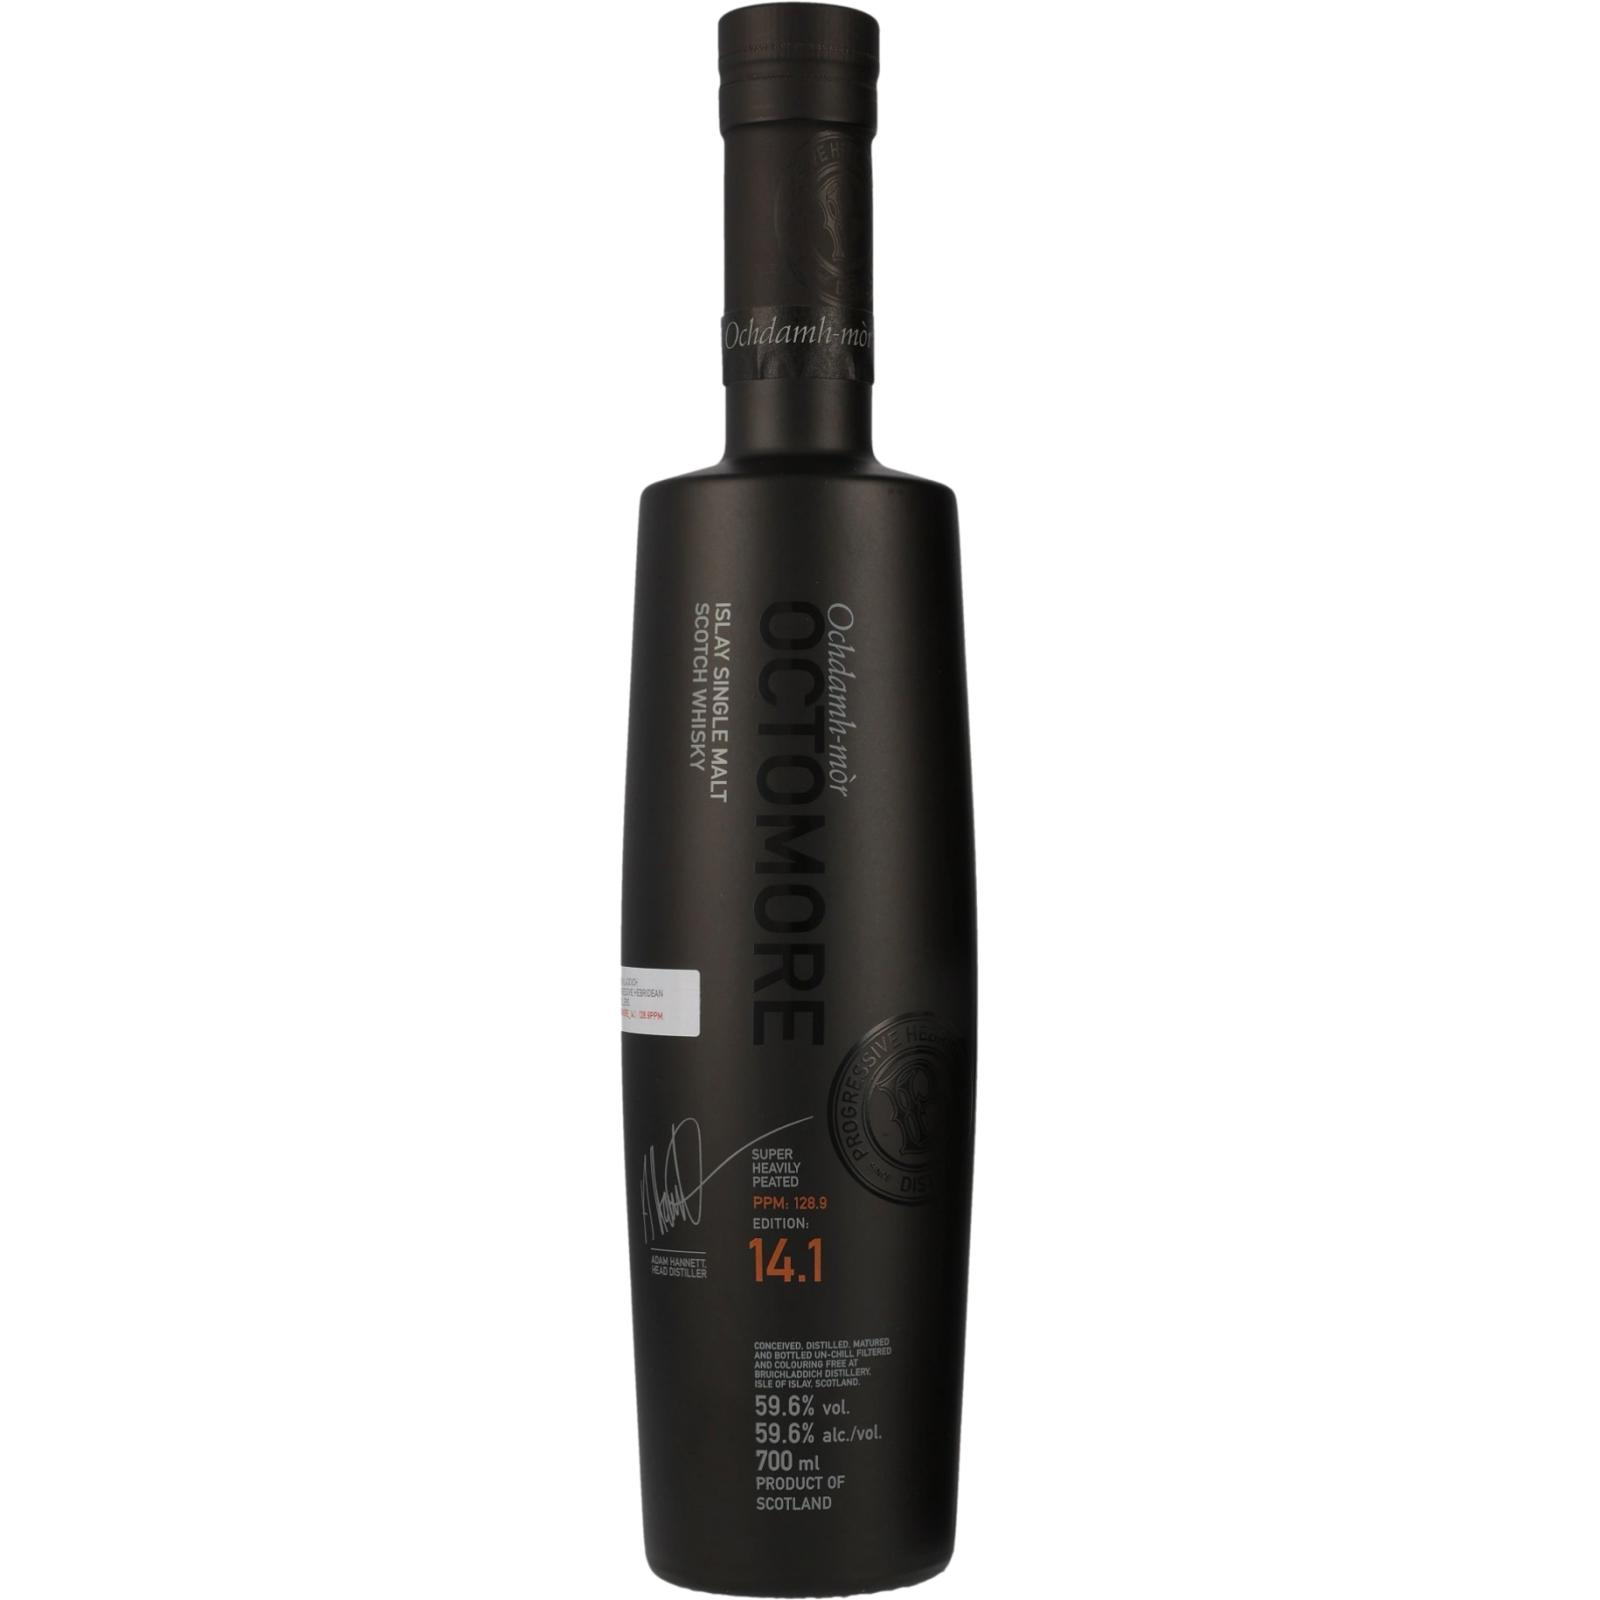 You are currently viewing Octomore 14.1